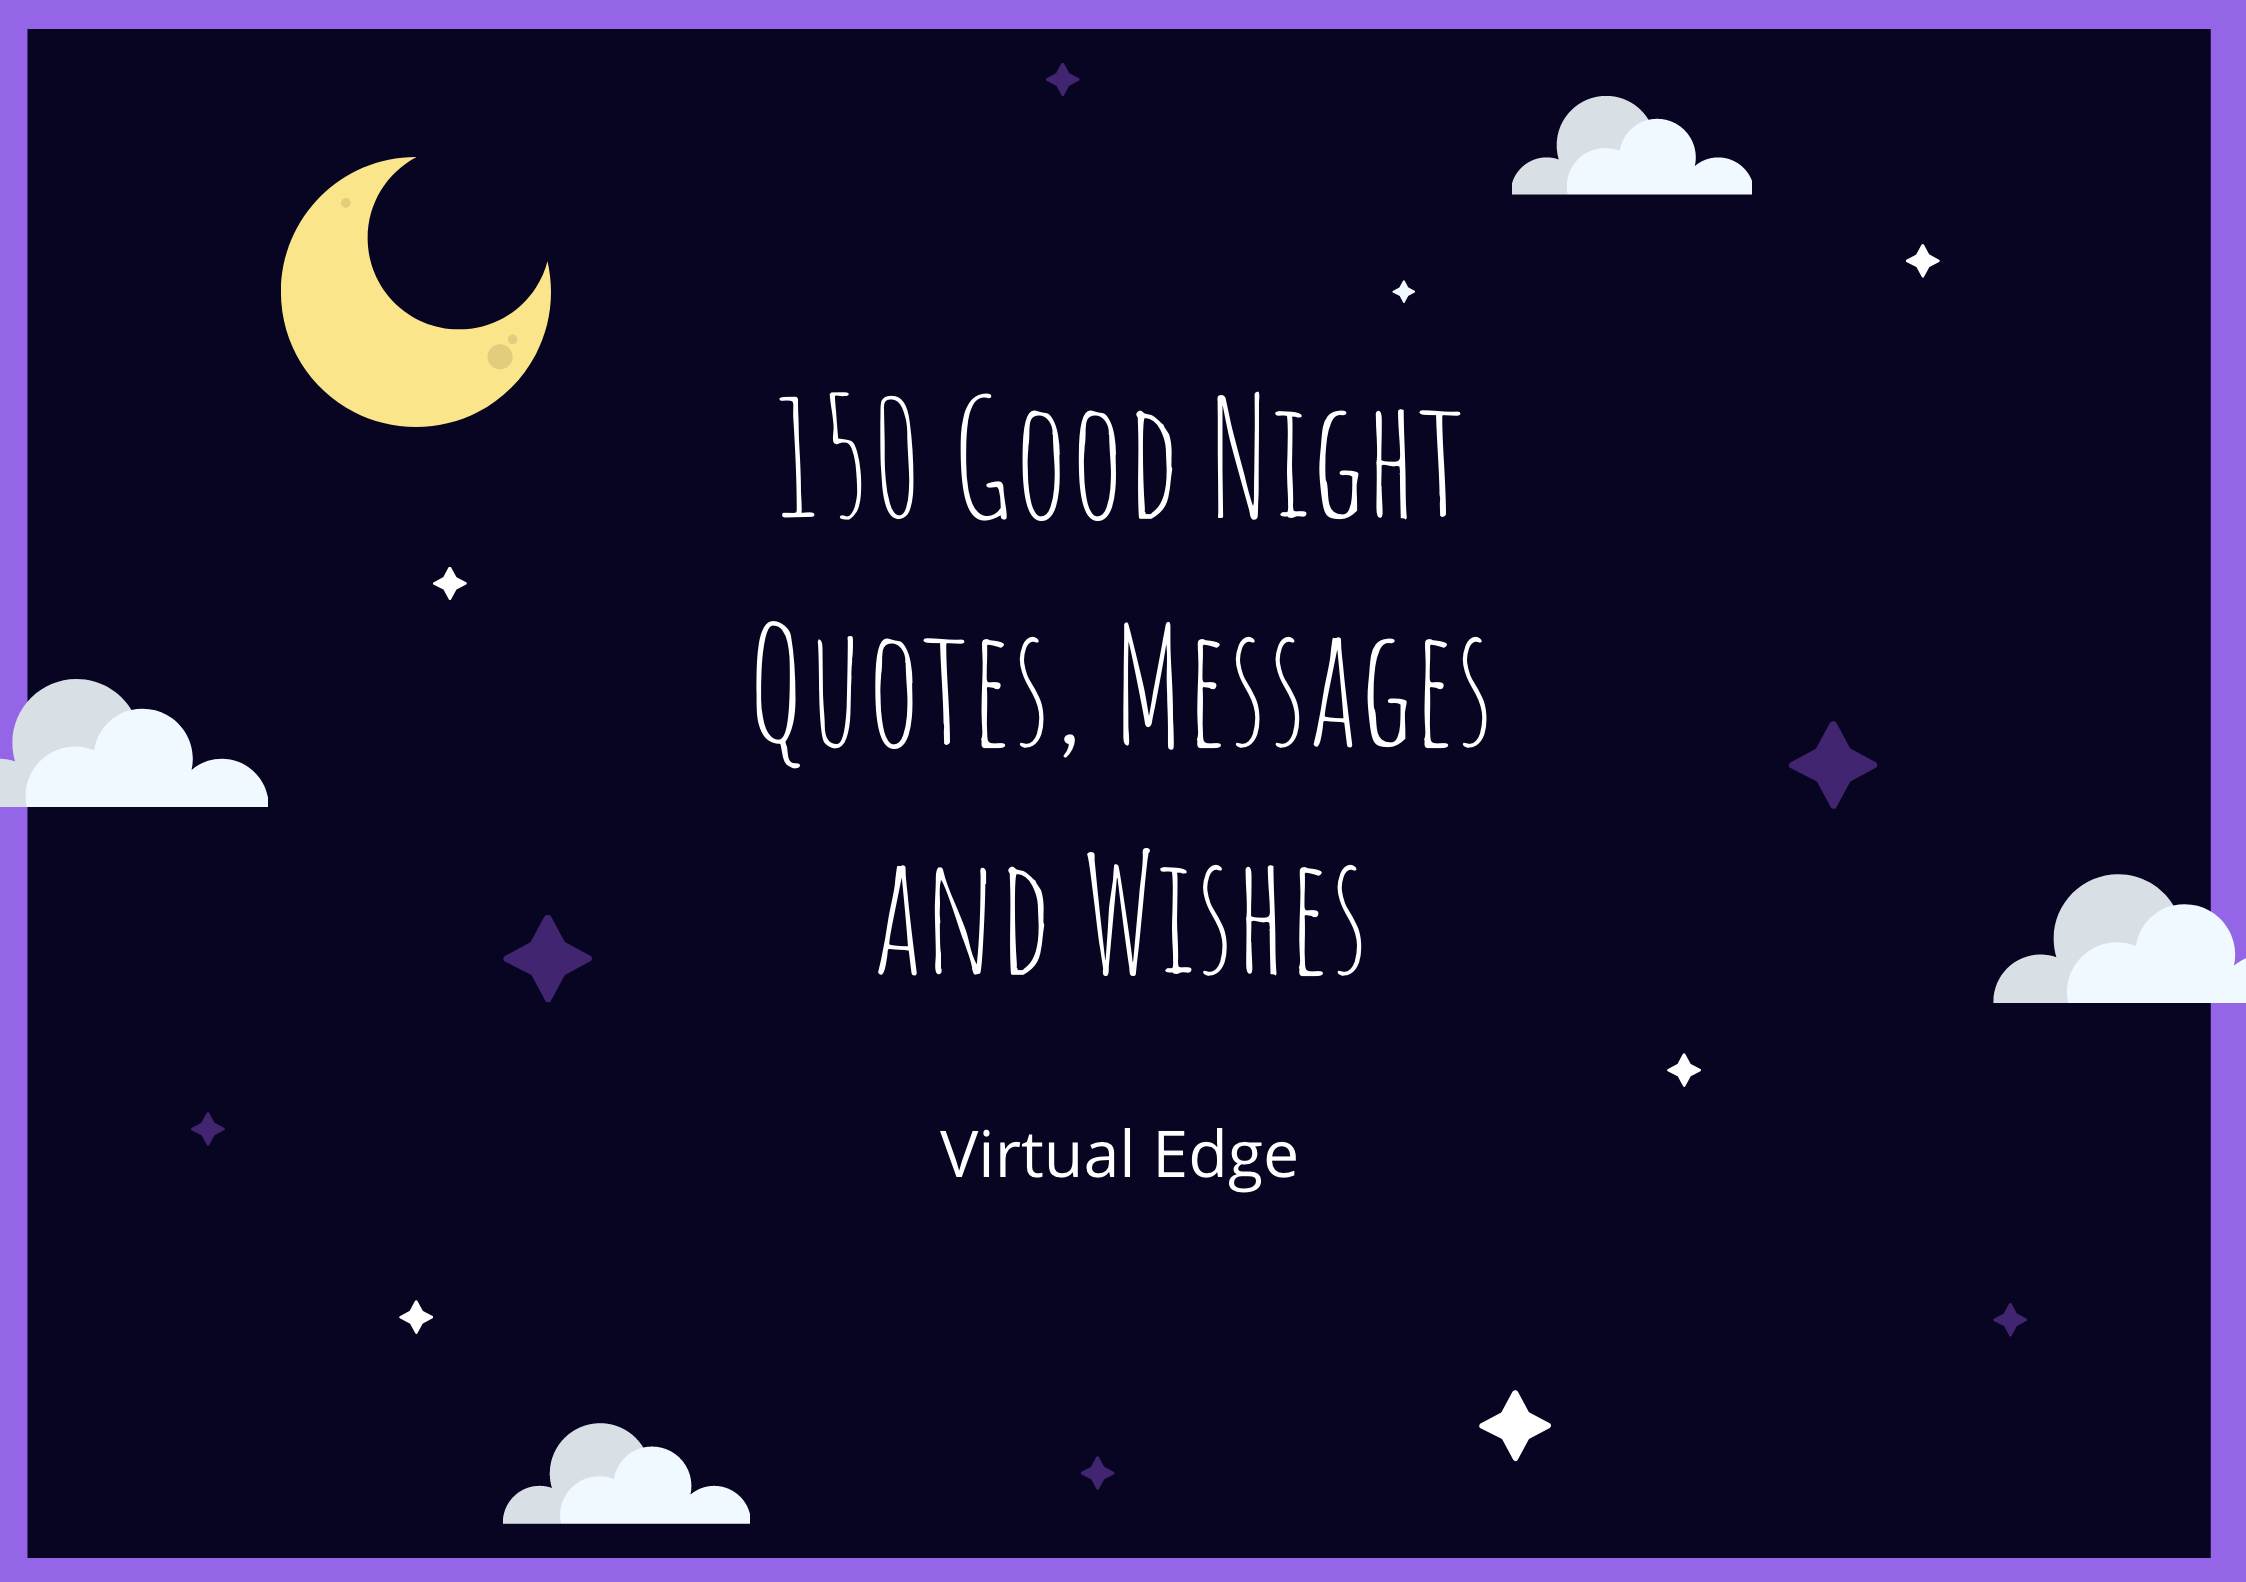 150 Good Night Quotes, Messages and Wishes